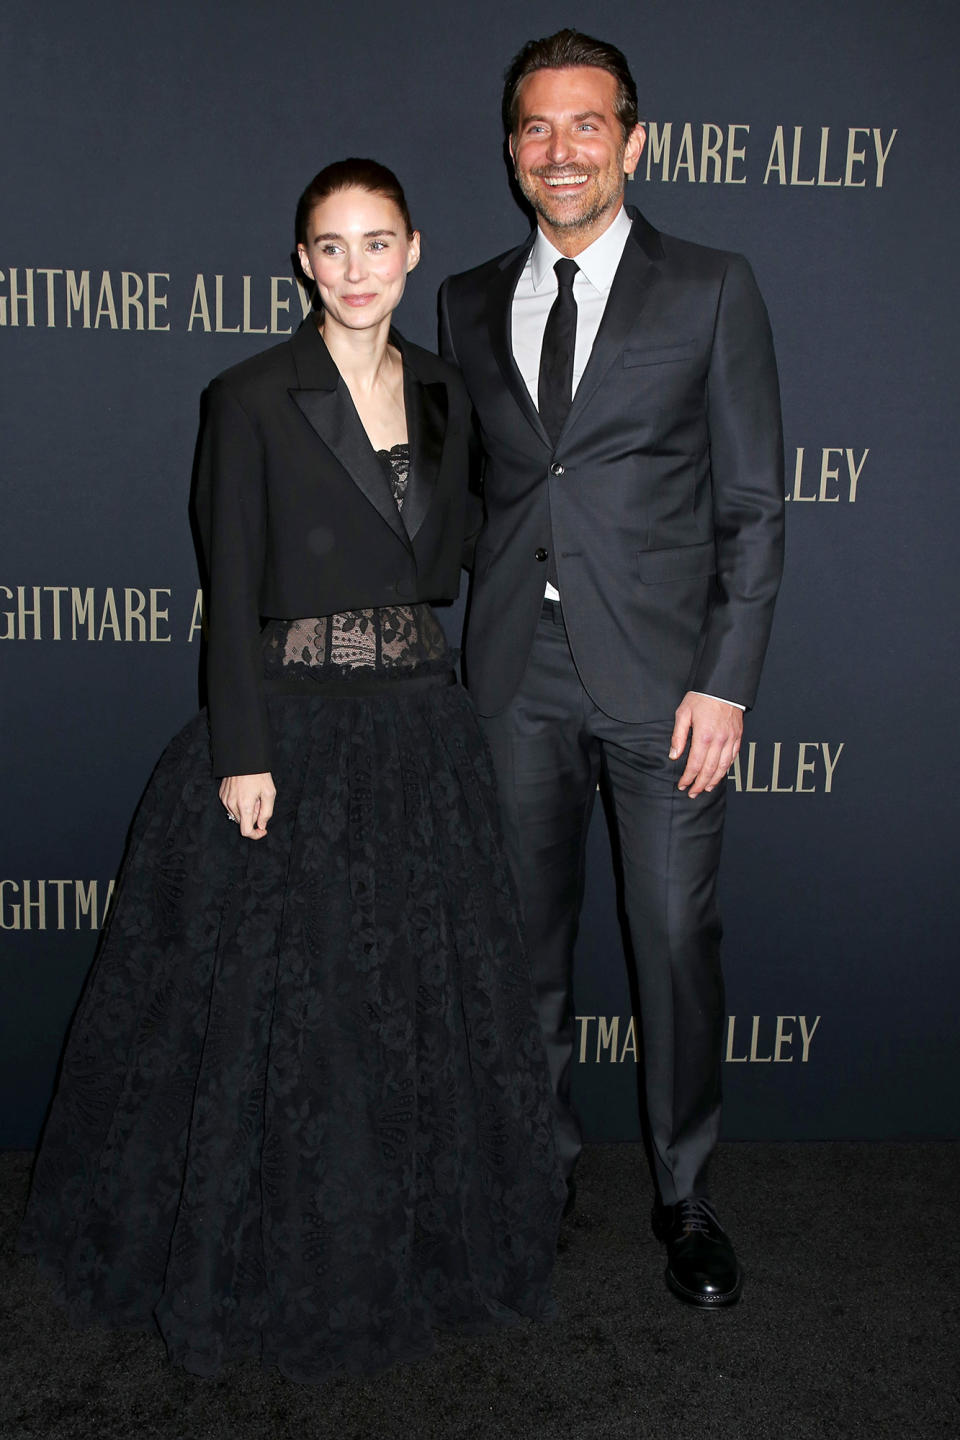 <p>Rooney Mara and Bradley Cooper share smiles on Dec. 1 at the <em>Nightmare Alley </em>premiere in N.Y.C.</p>